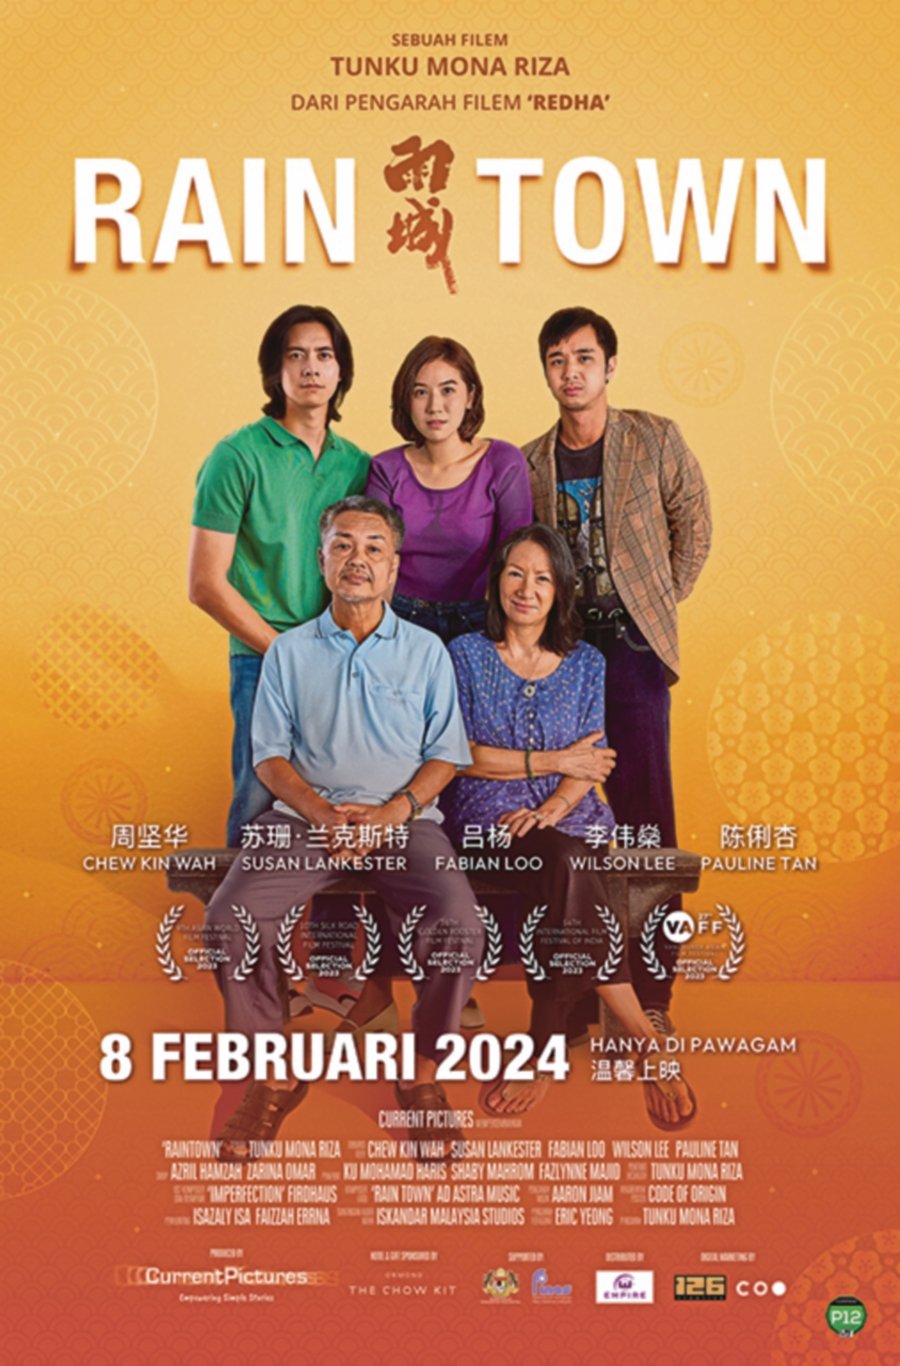 ‘Rain Town’ opens in cinemas on Feb 8. Photo courtesy of Current Pictures Sdn Bhd